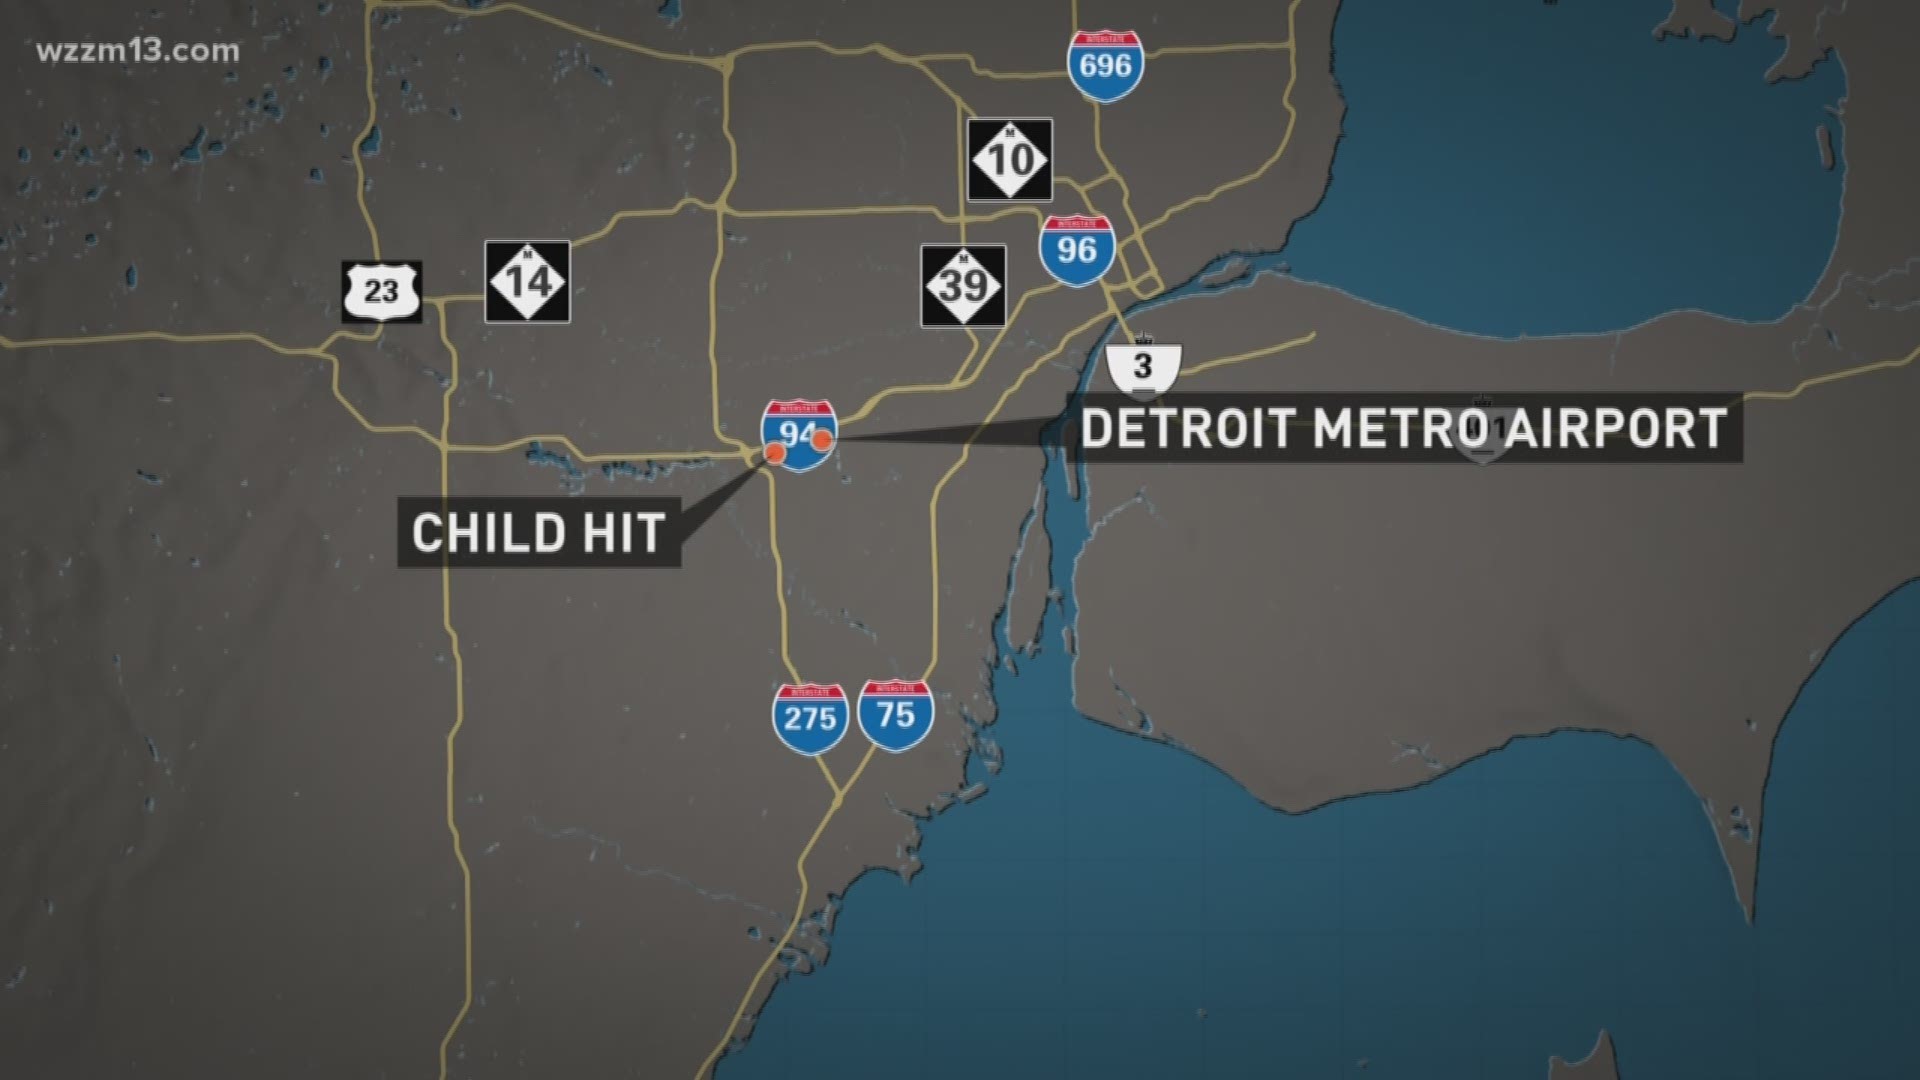 7-year-old killed by car near Detroit Metro Airport